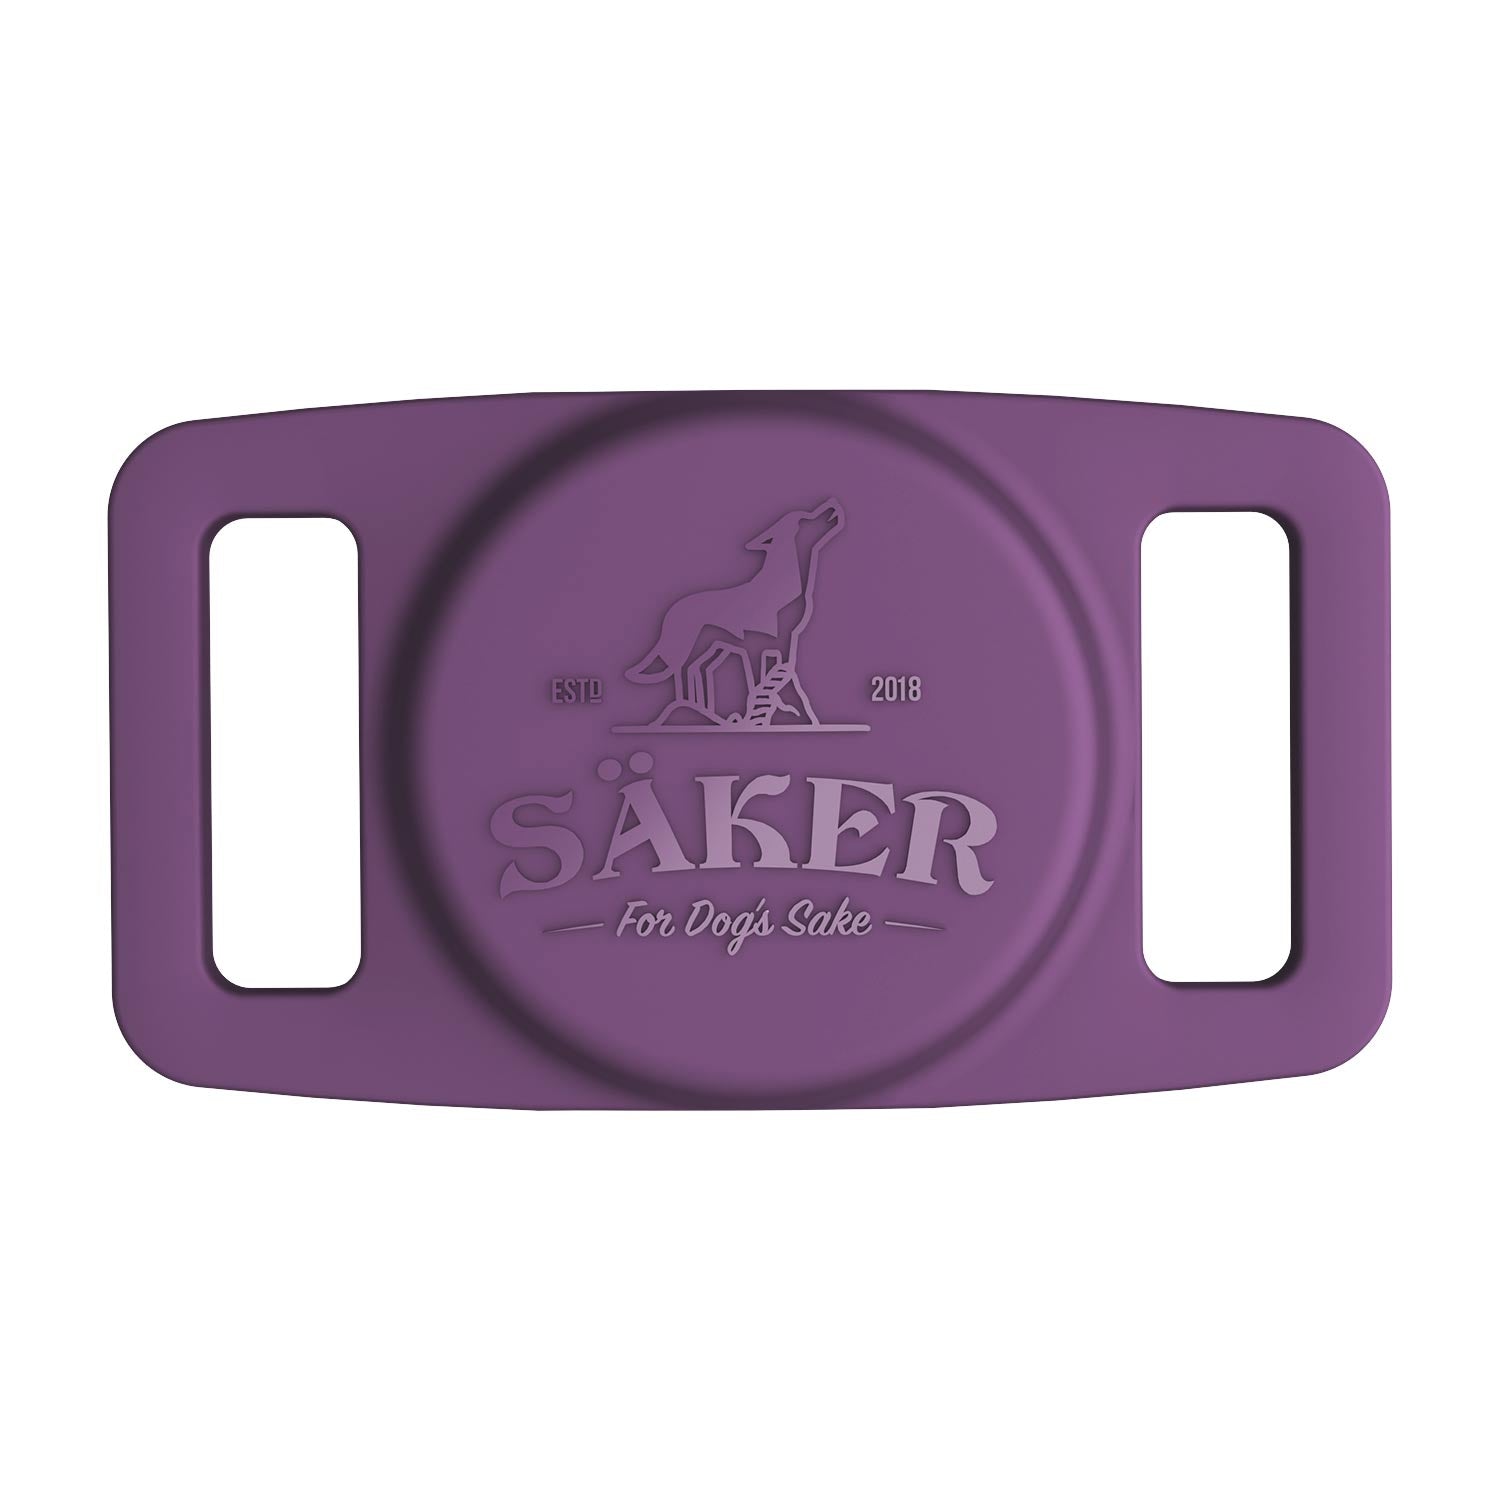 Main image of the Mammoth Airtag Holder in Prairie Purple